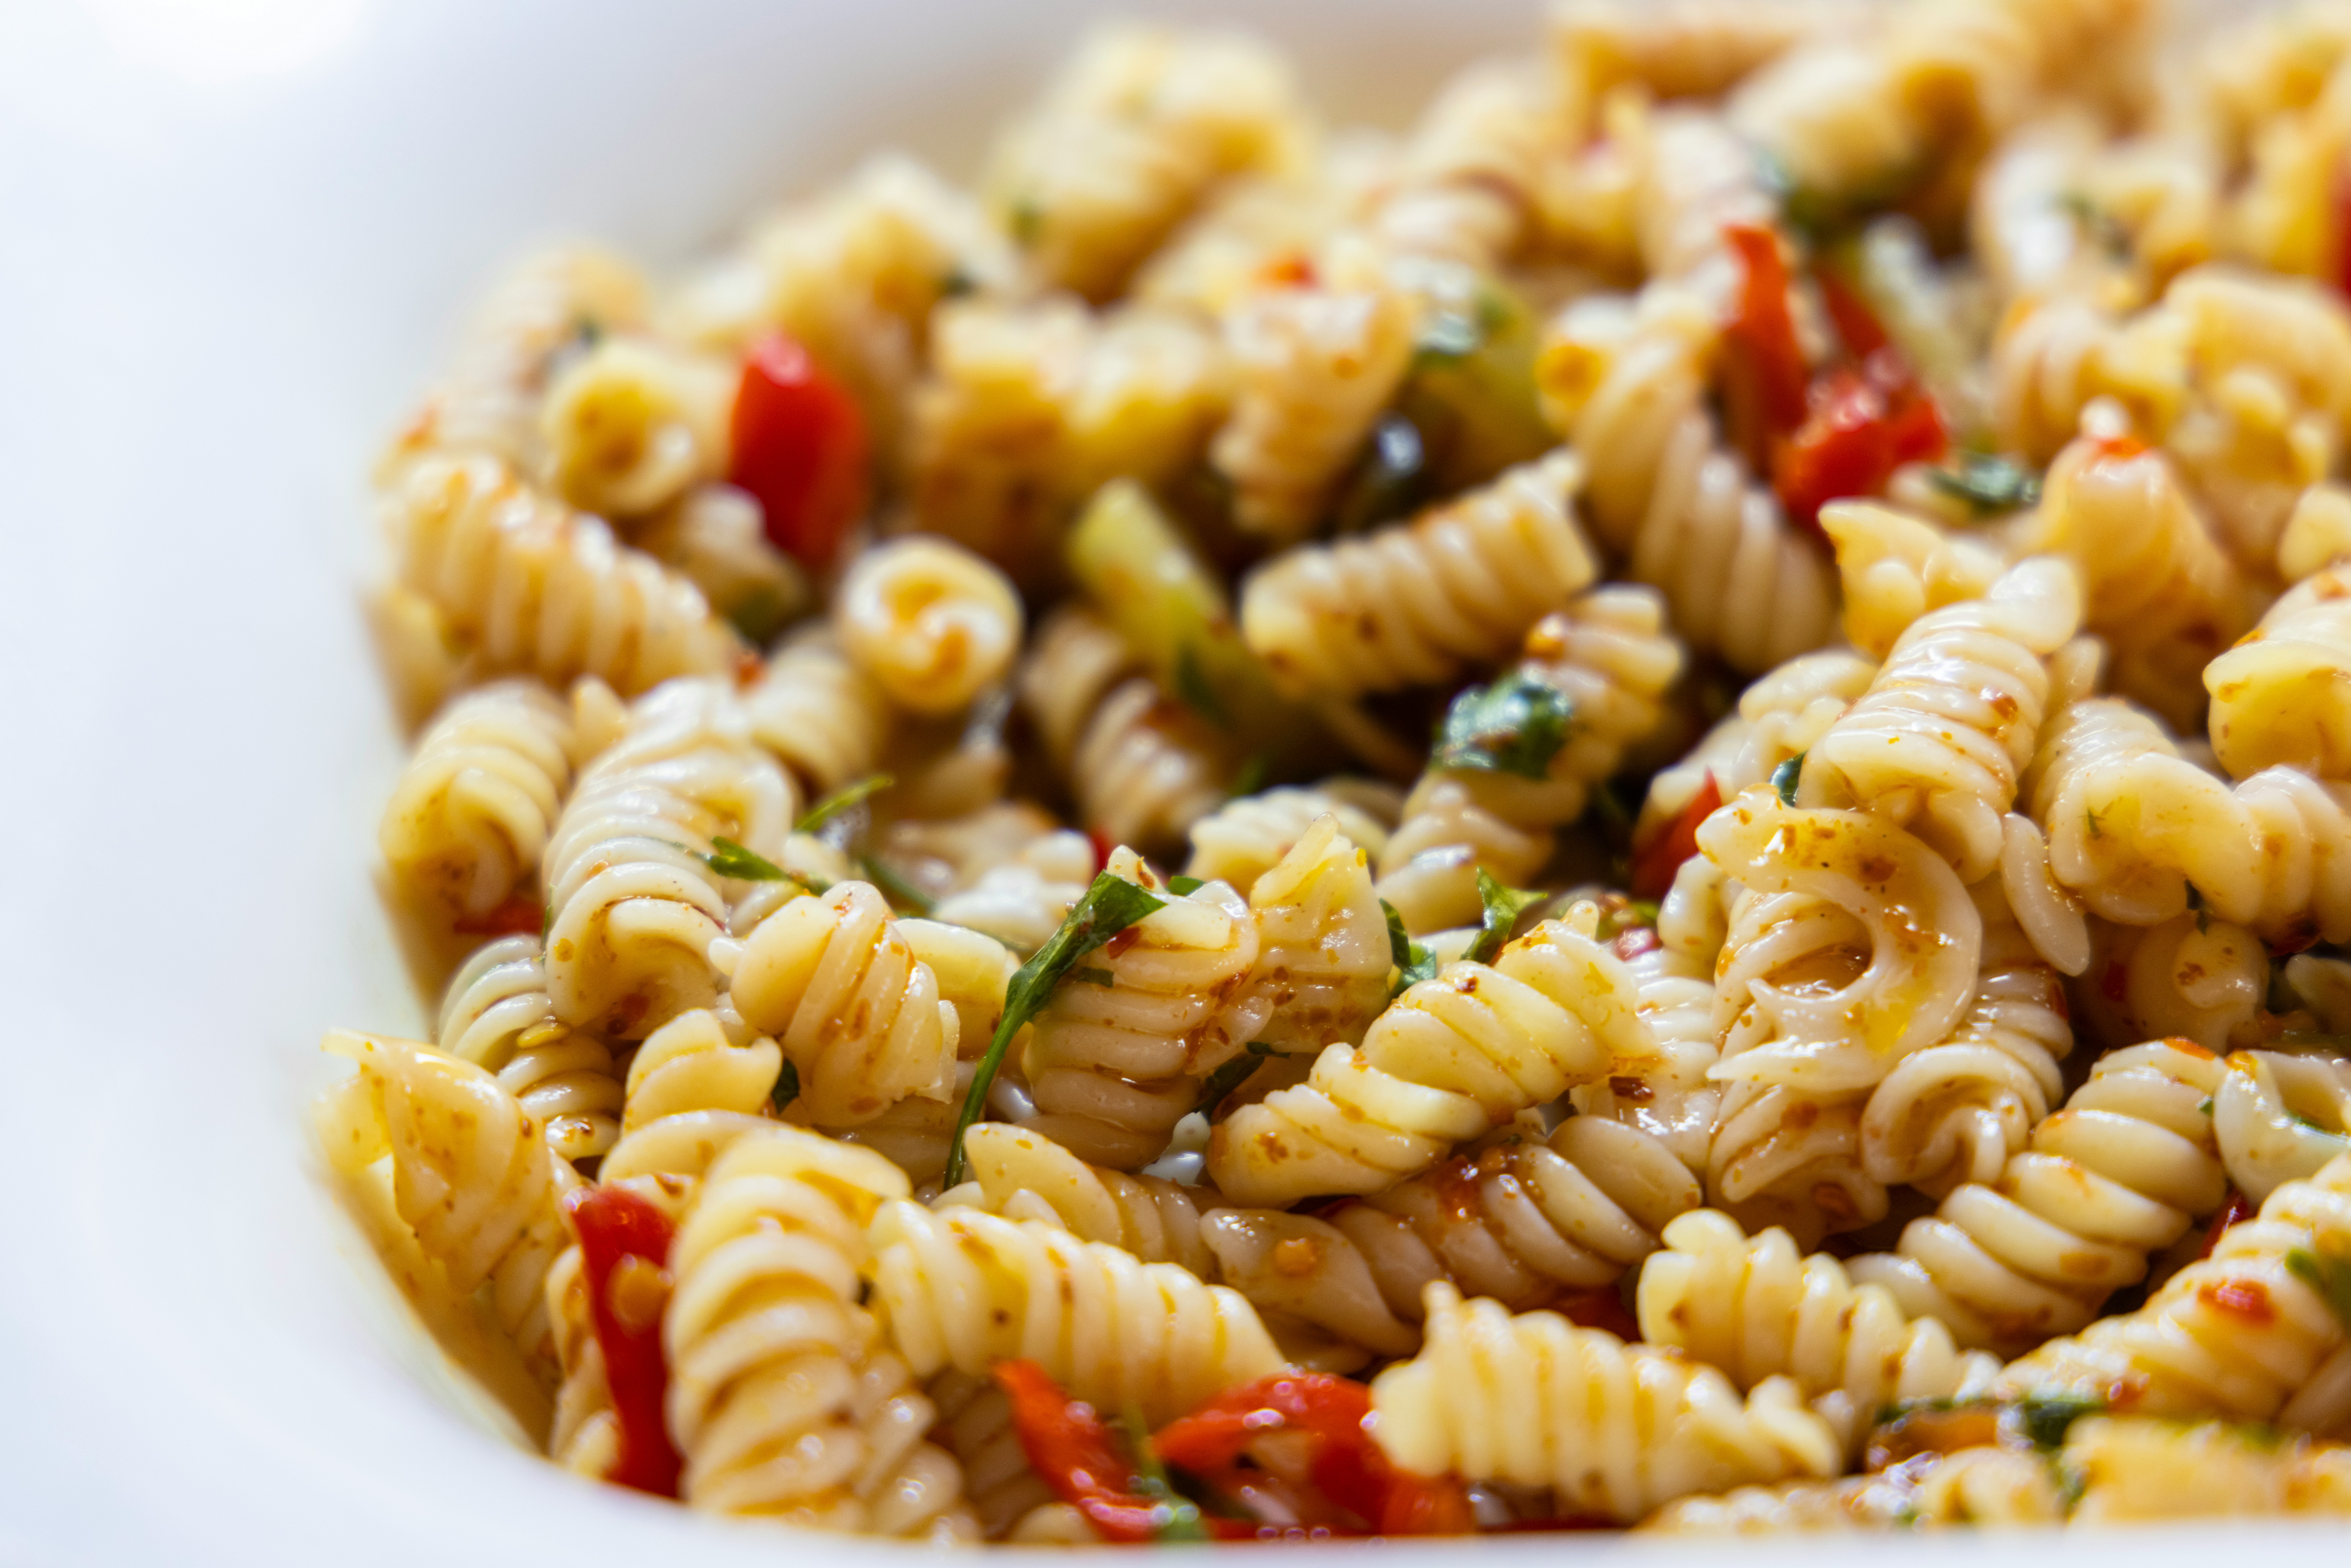 This light dinner idea is refreshing and perfect for a summer party gathering. Pictured: pasta salad